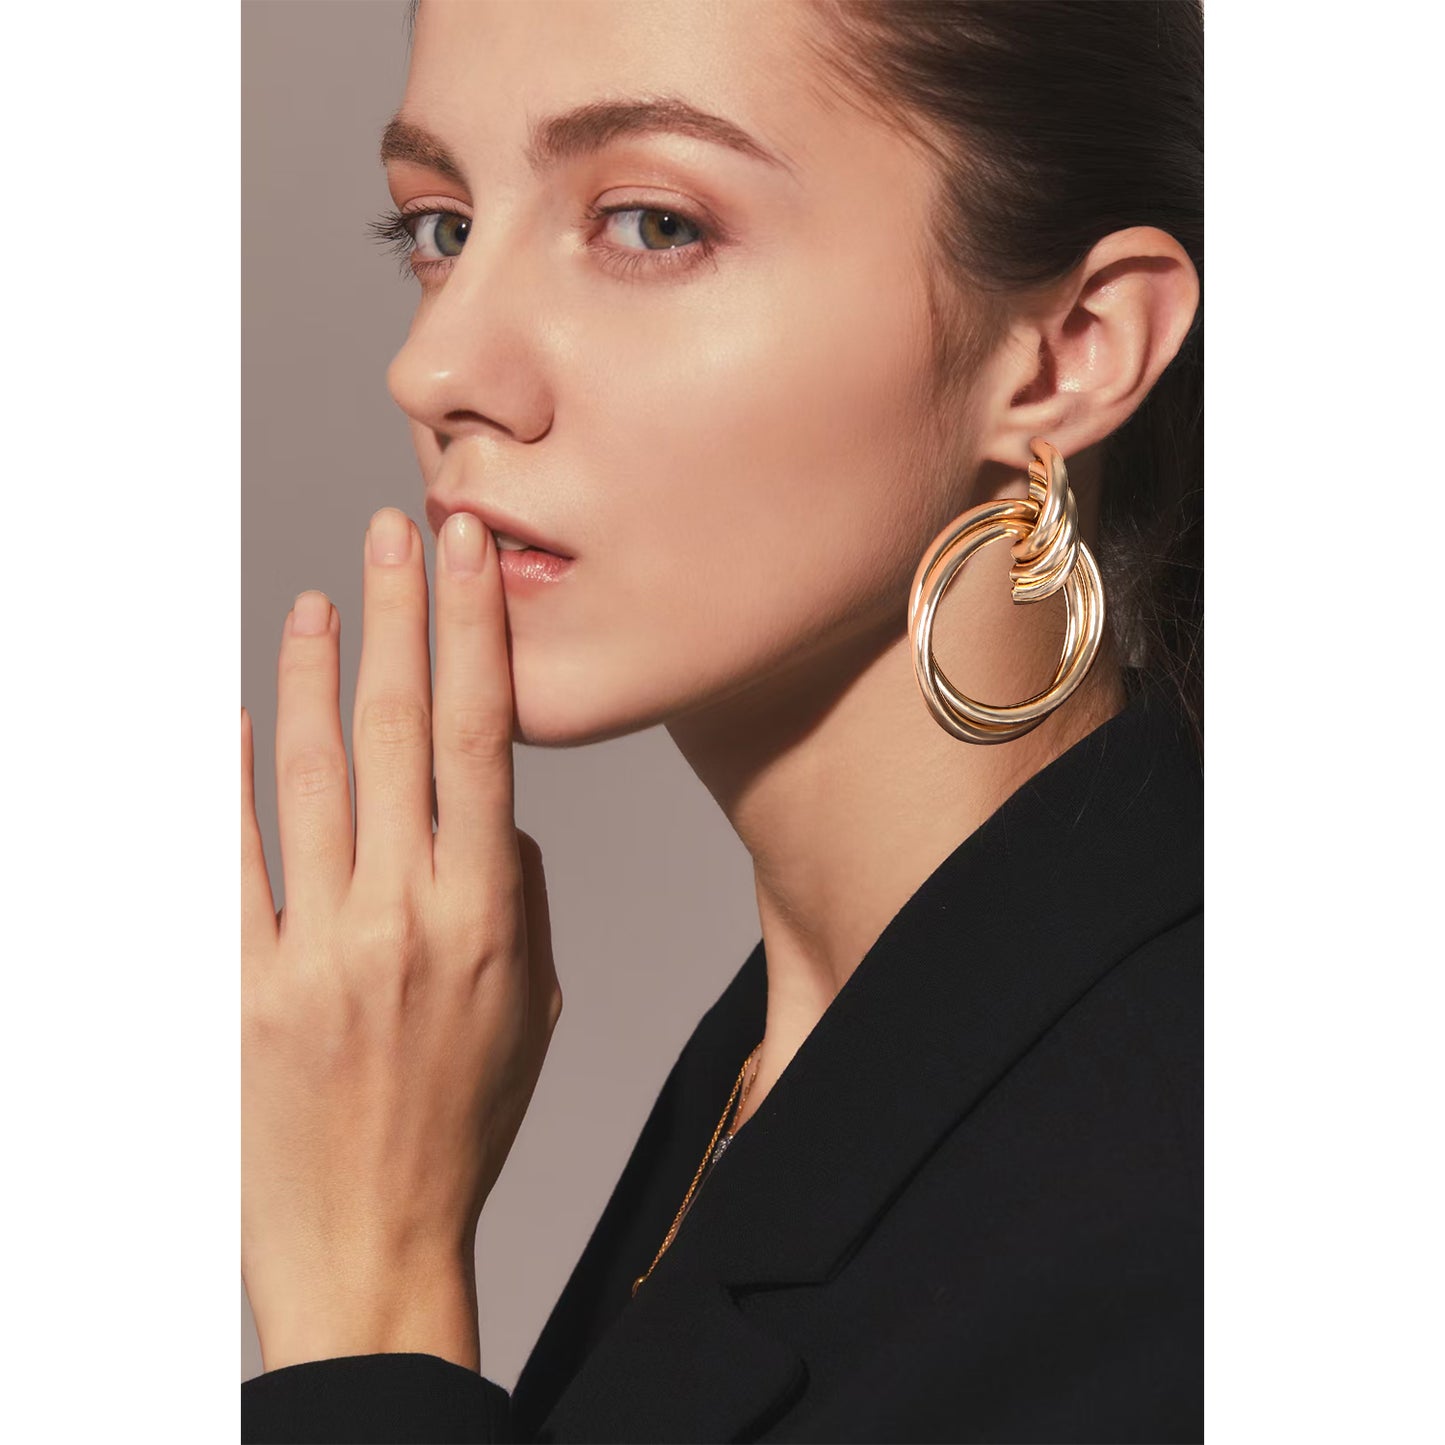 Alilang 14K Gold Plated Twisted Hoop Earrings for Womens Girls, Round Earrings with 925 Sterling Silver Post for Sensitive Ears